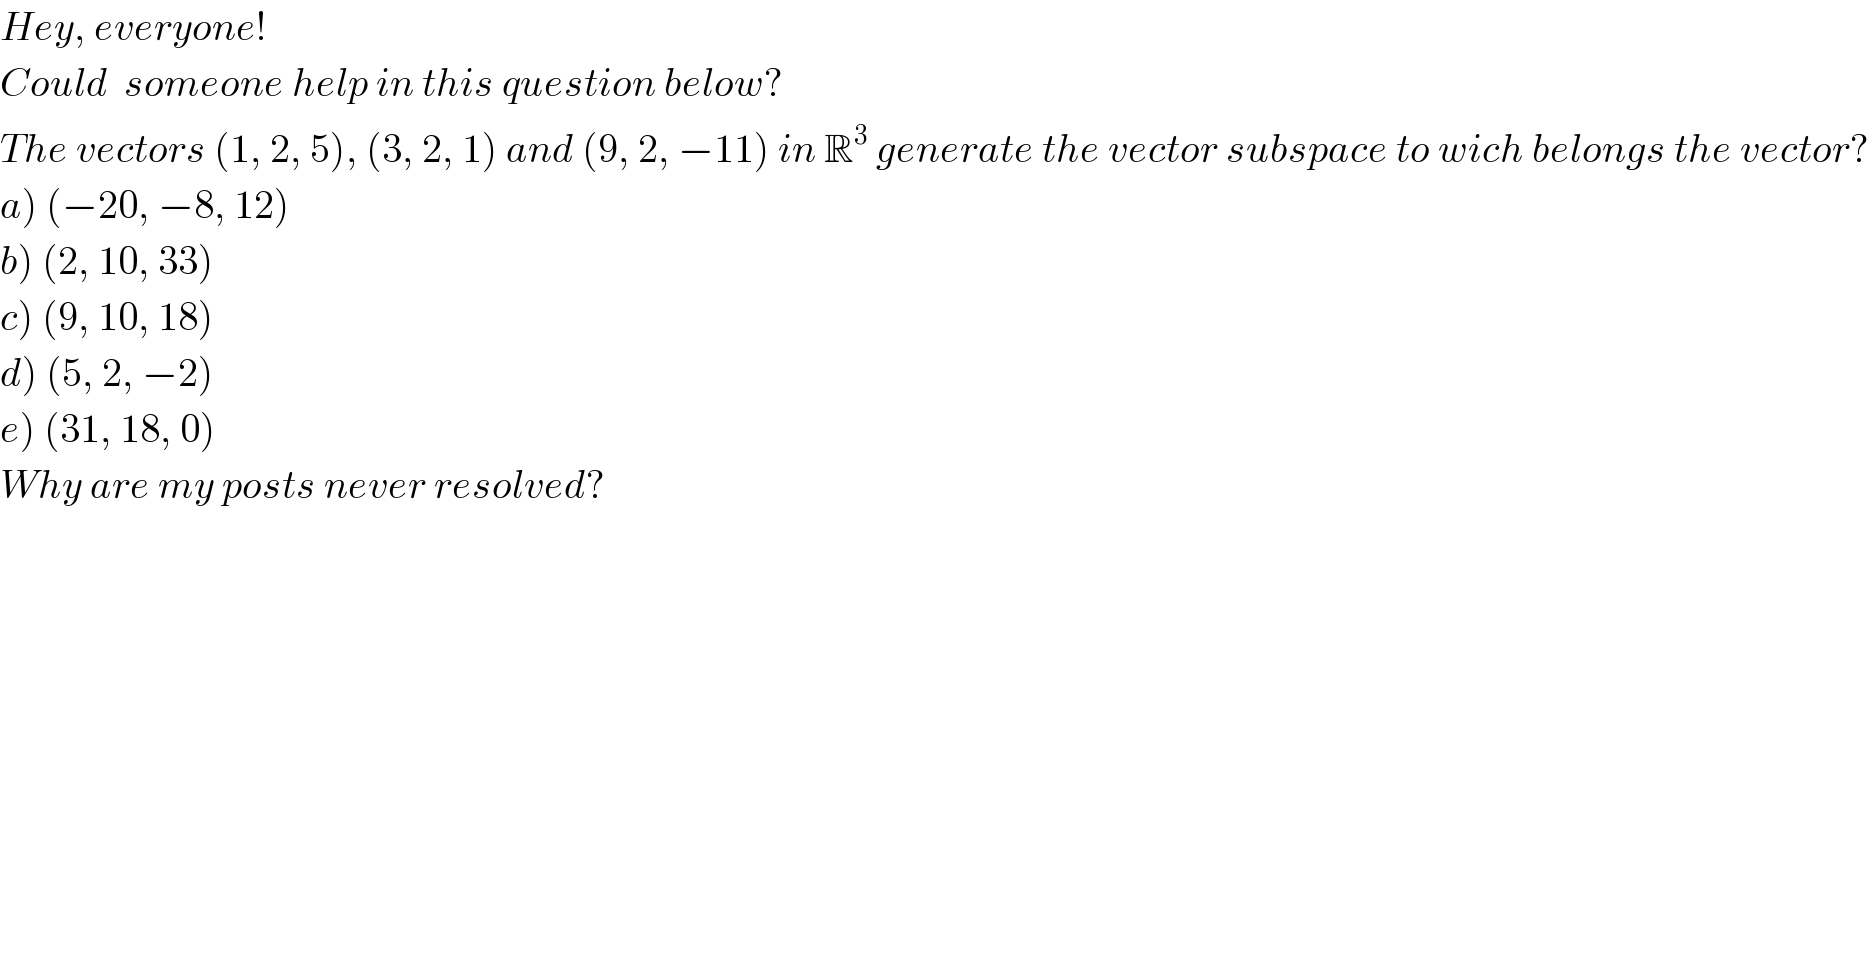 Hey, everyone!  Could  someone help in this question below?  The vectors (1, 2, 5), (3, 2, 1) and (9, 2, −11) in R^3  generate the vector subspace to wich belongs the vector?  a) (−20, −8, 12)  b) (2, 10, 33)  c) (9, 10, 18)  d) (5, 2, −2)  e) (31, 18, 0)  Why are my posts never resolved?      